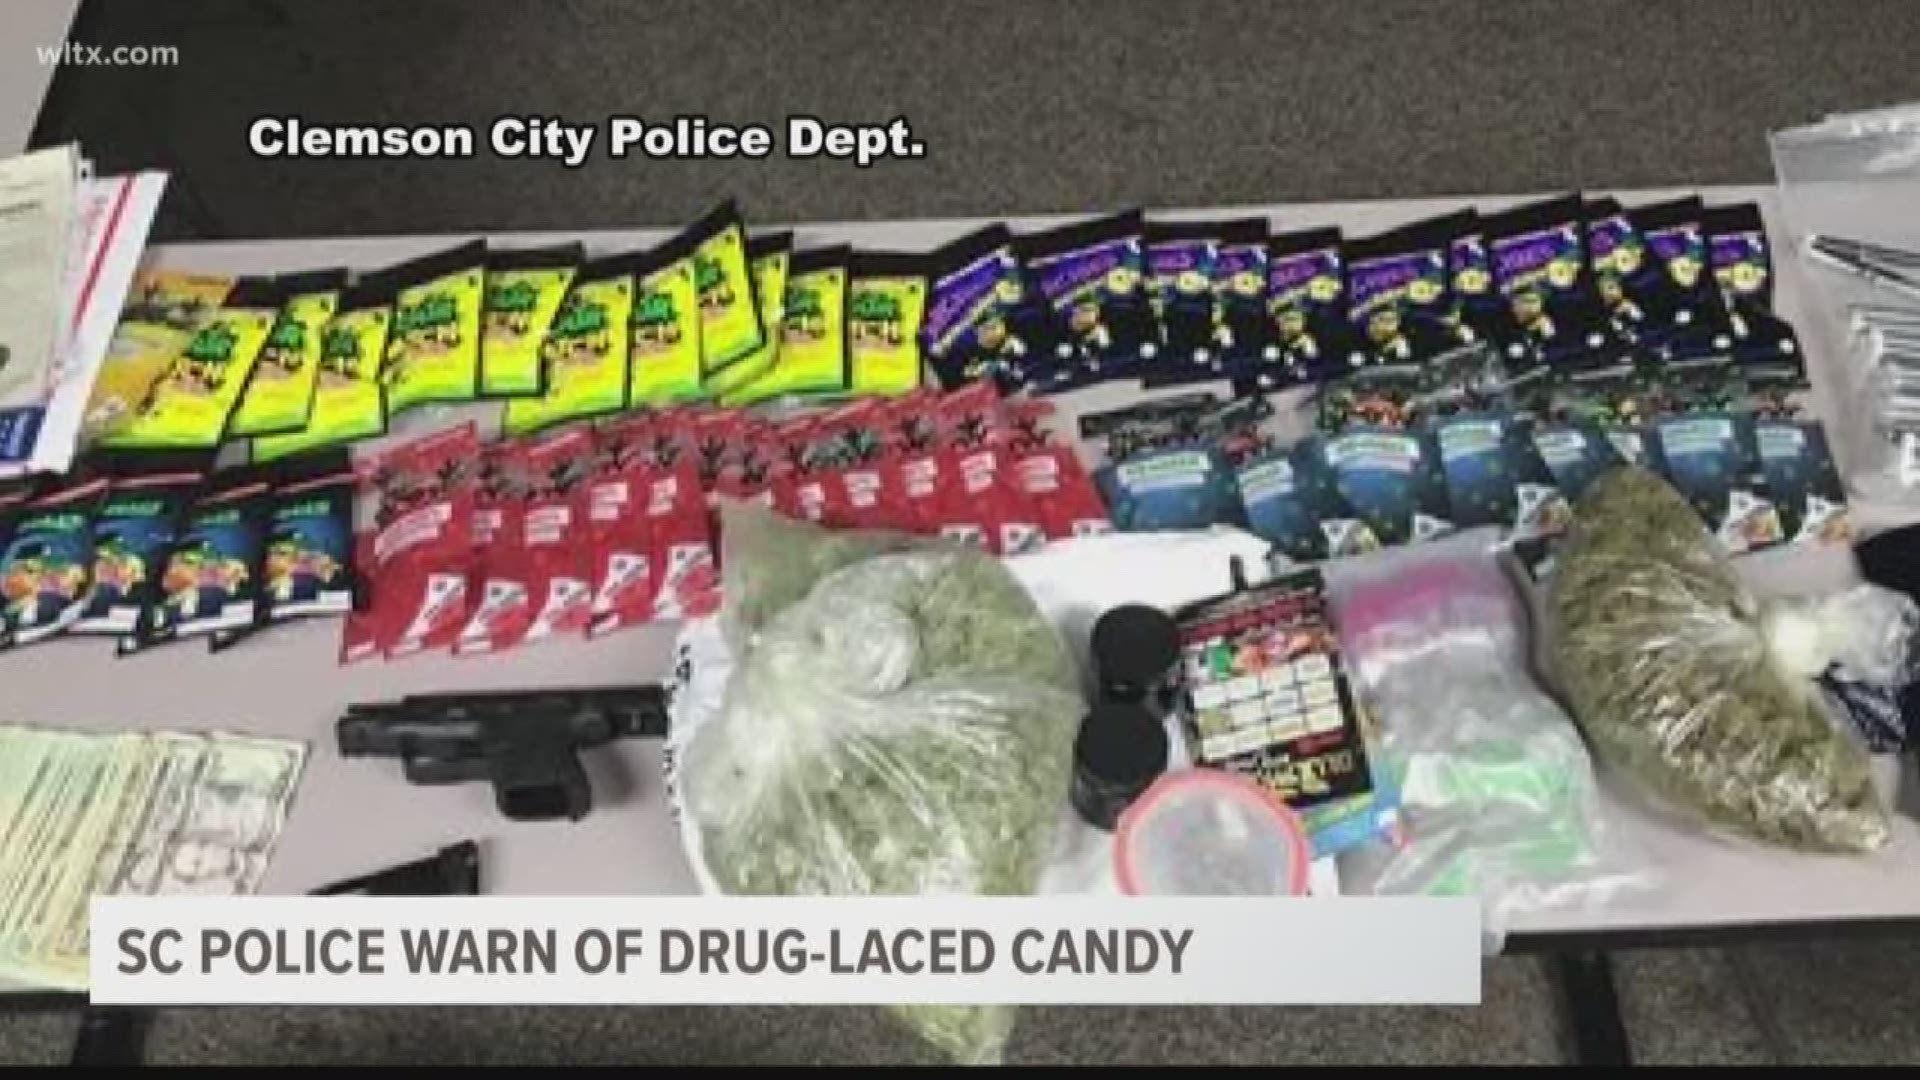 Police are warning parents after a traffic stop led officers to find THC-laced candies.